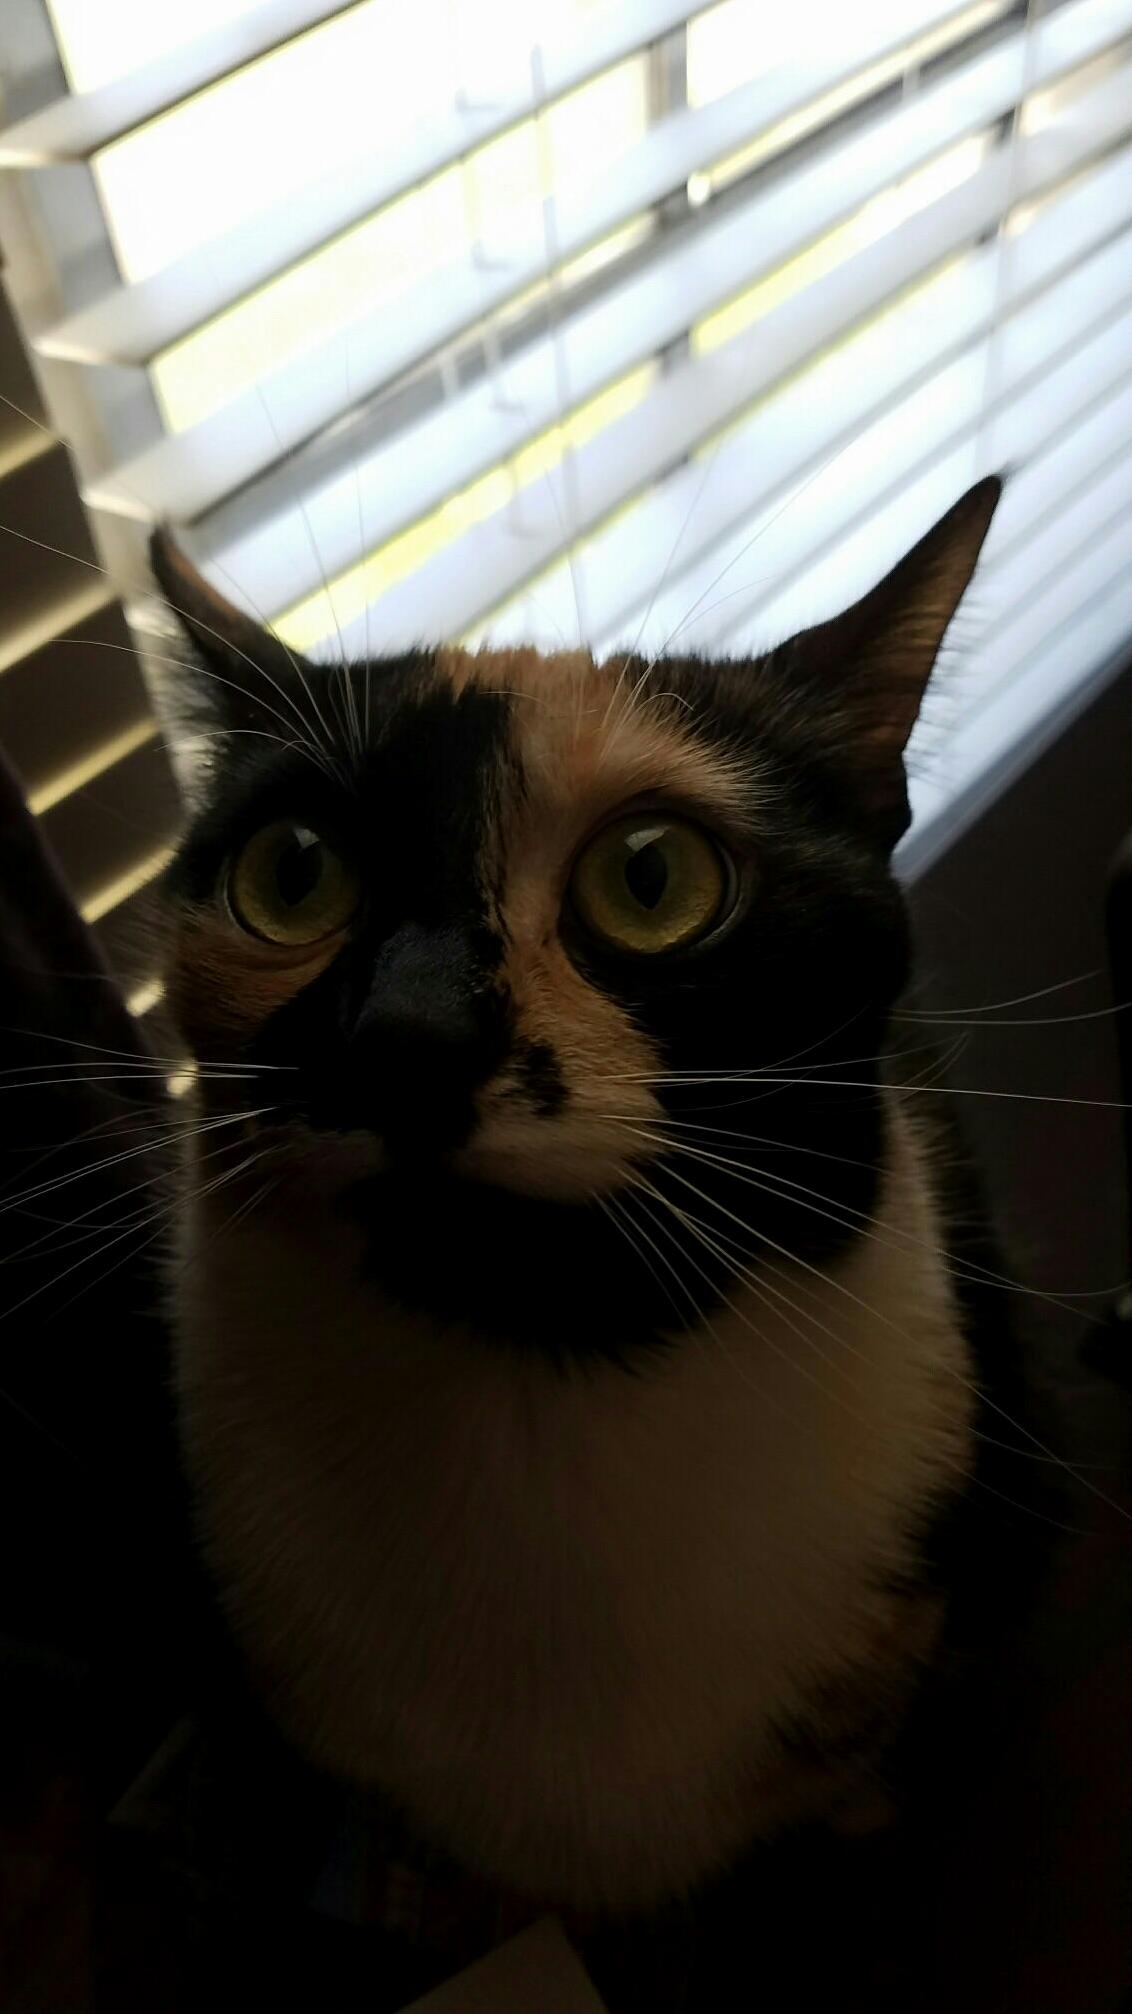 My girlfriends calico is ridiculously photogenic.